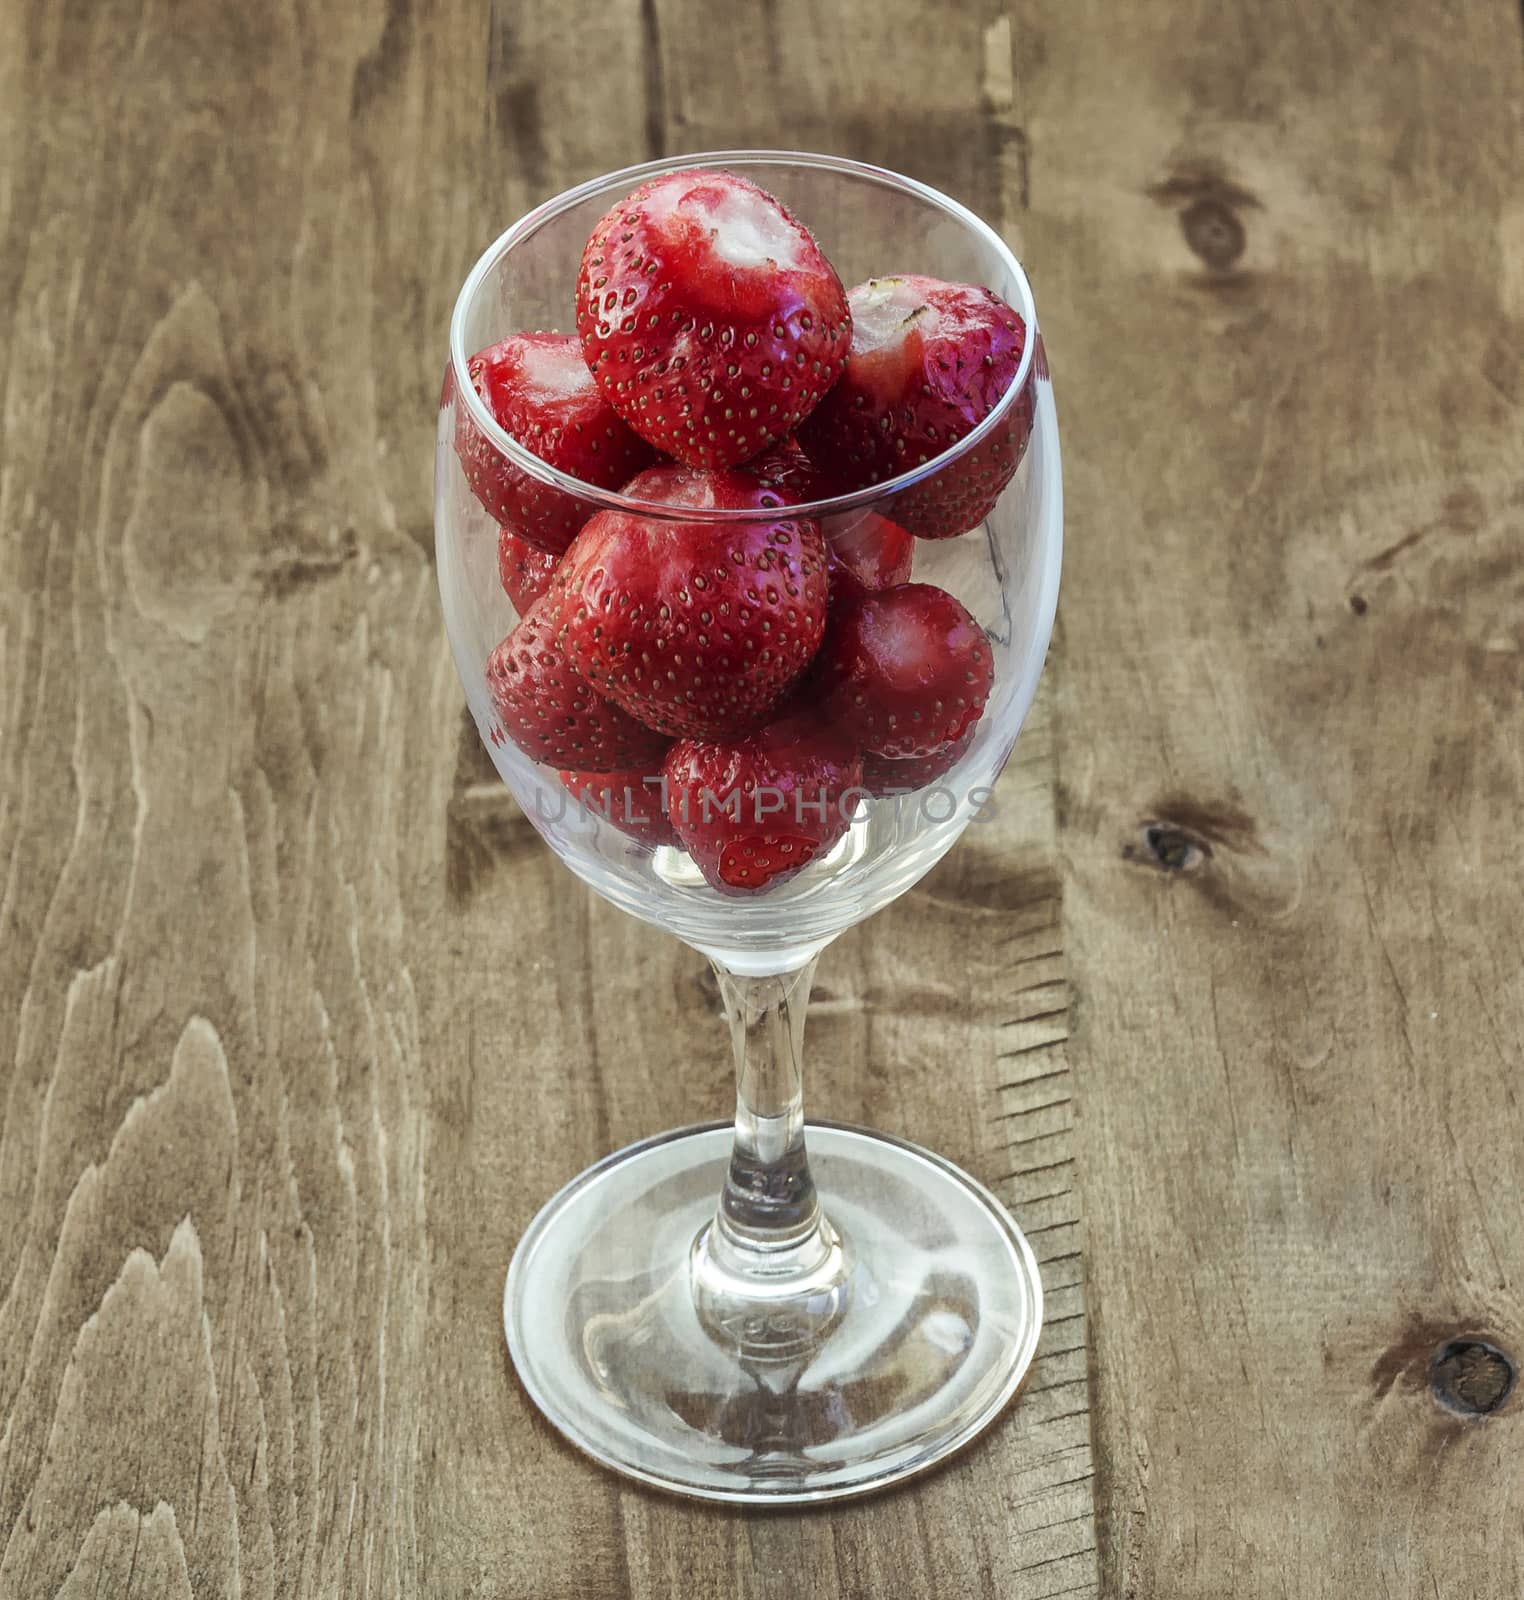 On the wooden surface is a glass wine glass with strawberries